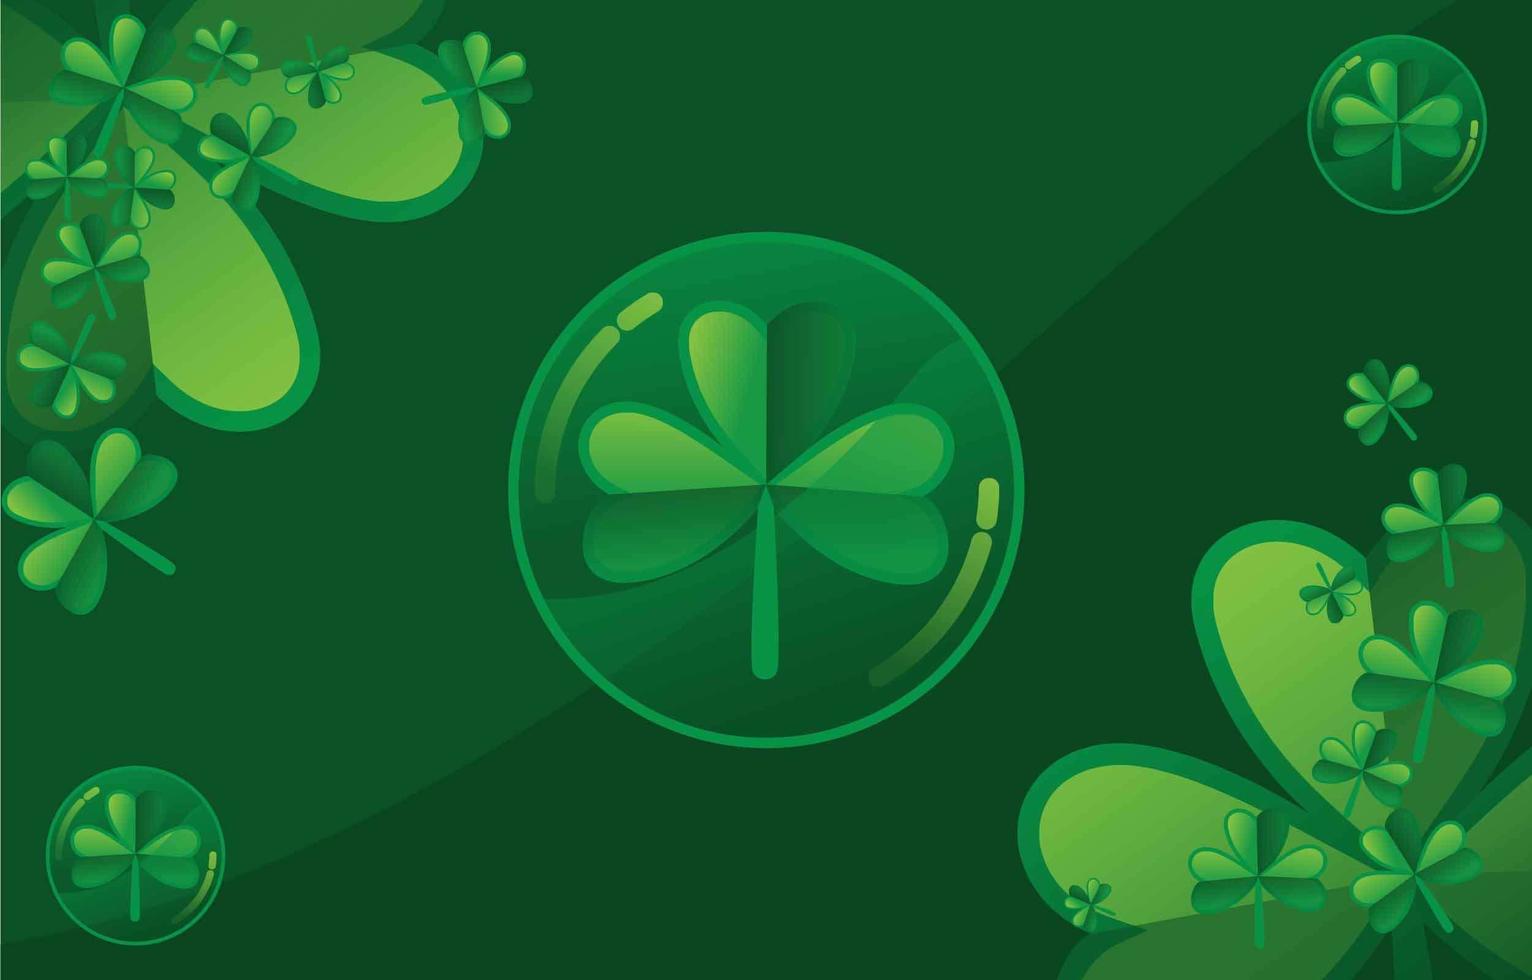 Clover Illustration With Green Accent vector